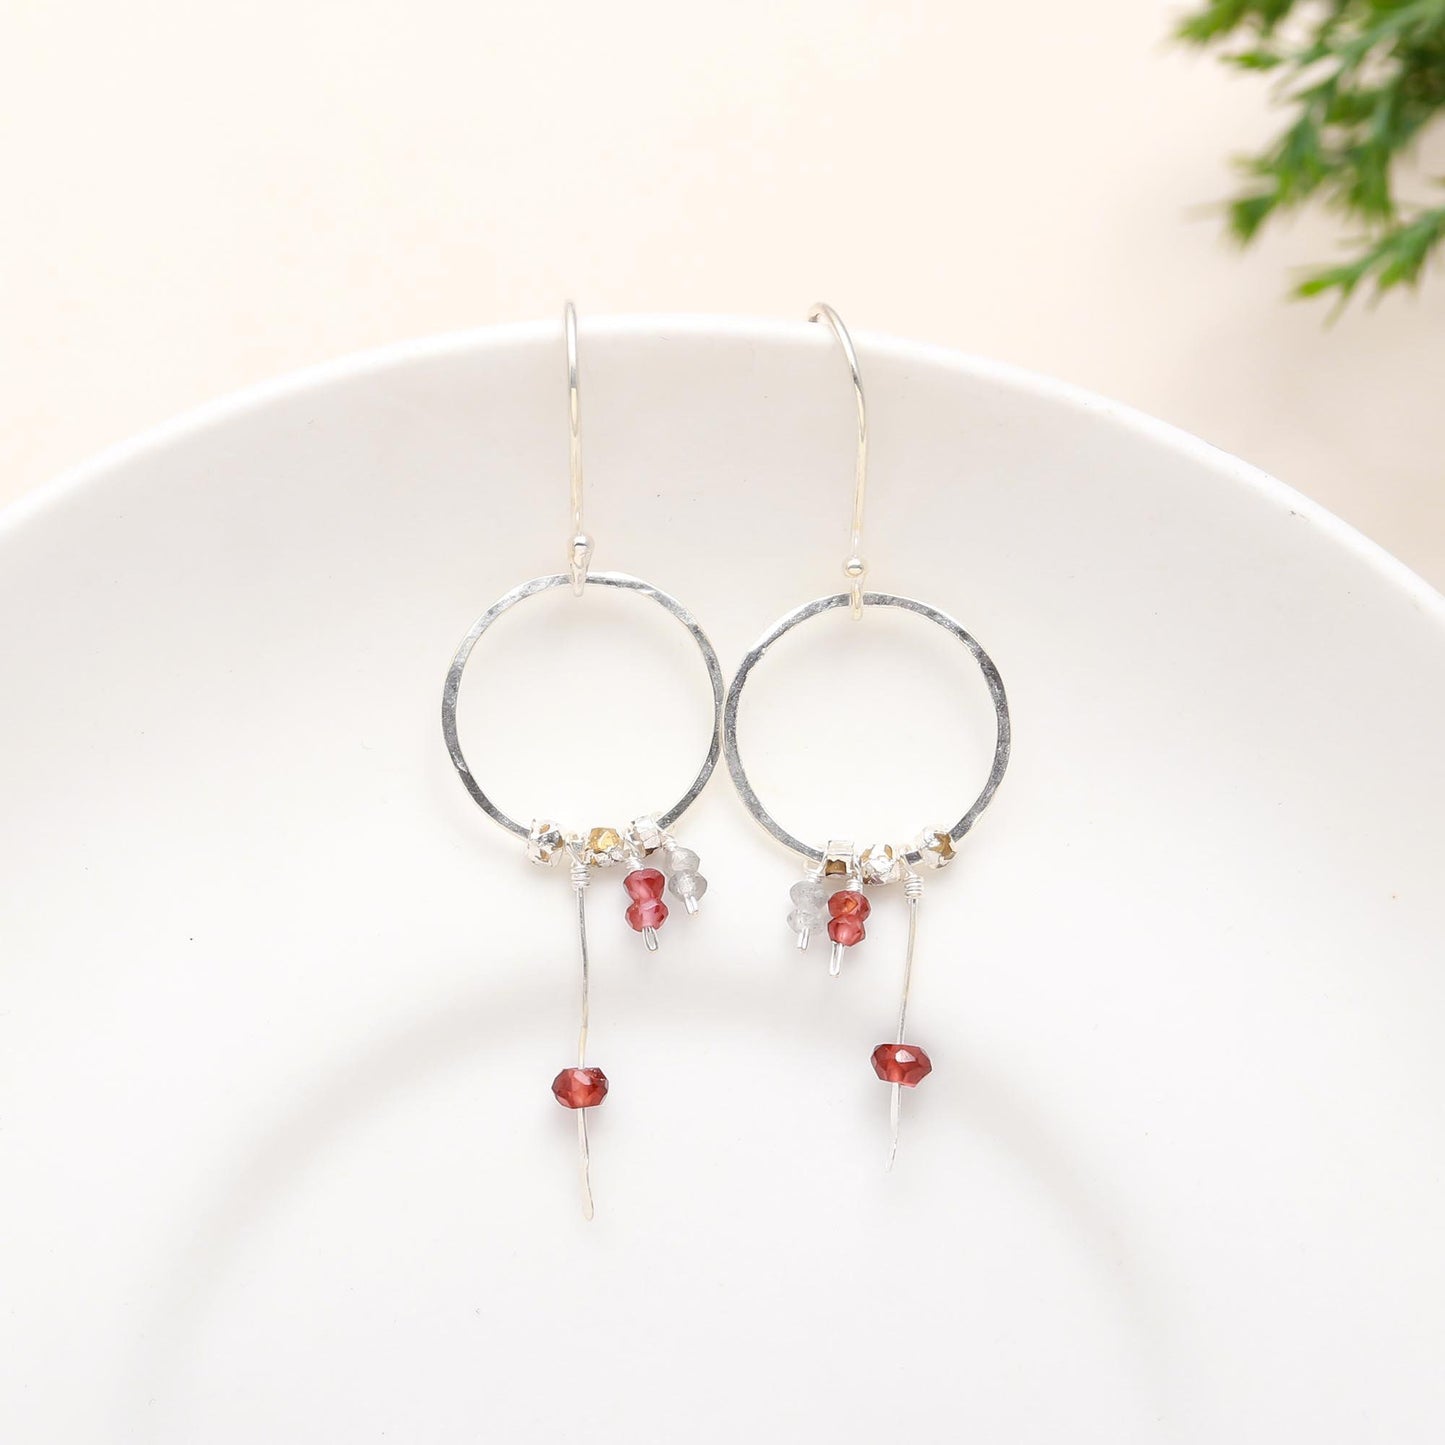 Silver Garnet Beads Hammered Earring Earwire Silver finish, Gift for her , Birthday, Anniversary, Mothers Day, Women Solid 925 Sterling